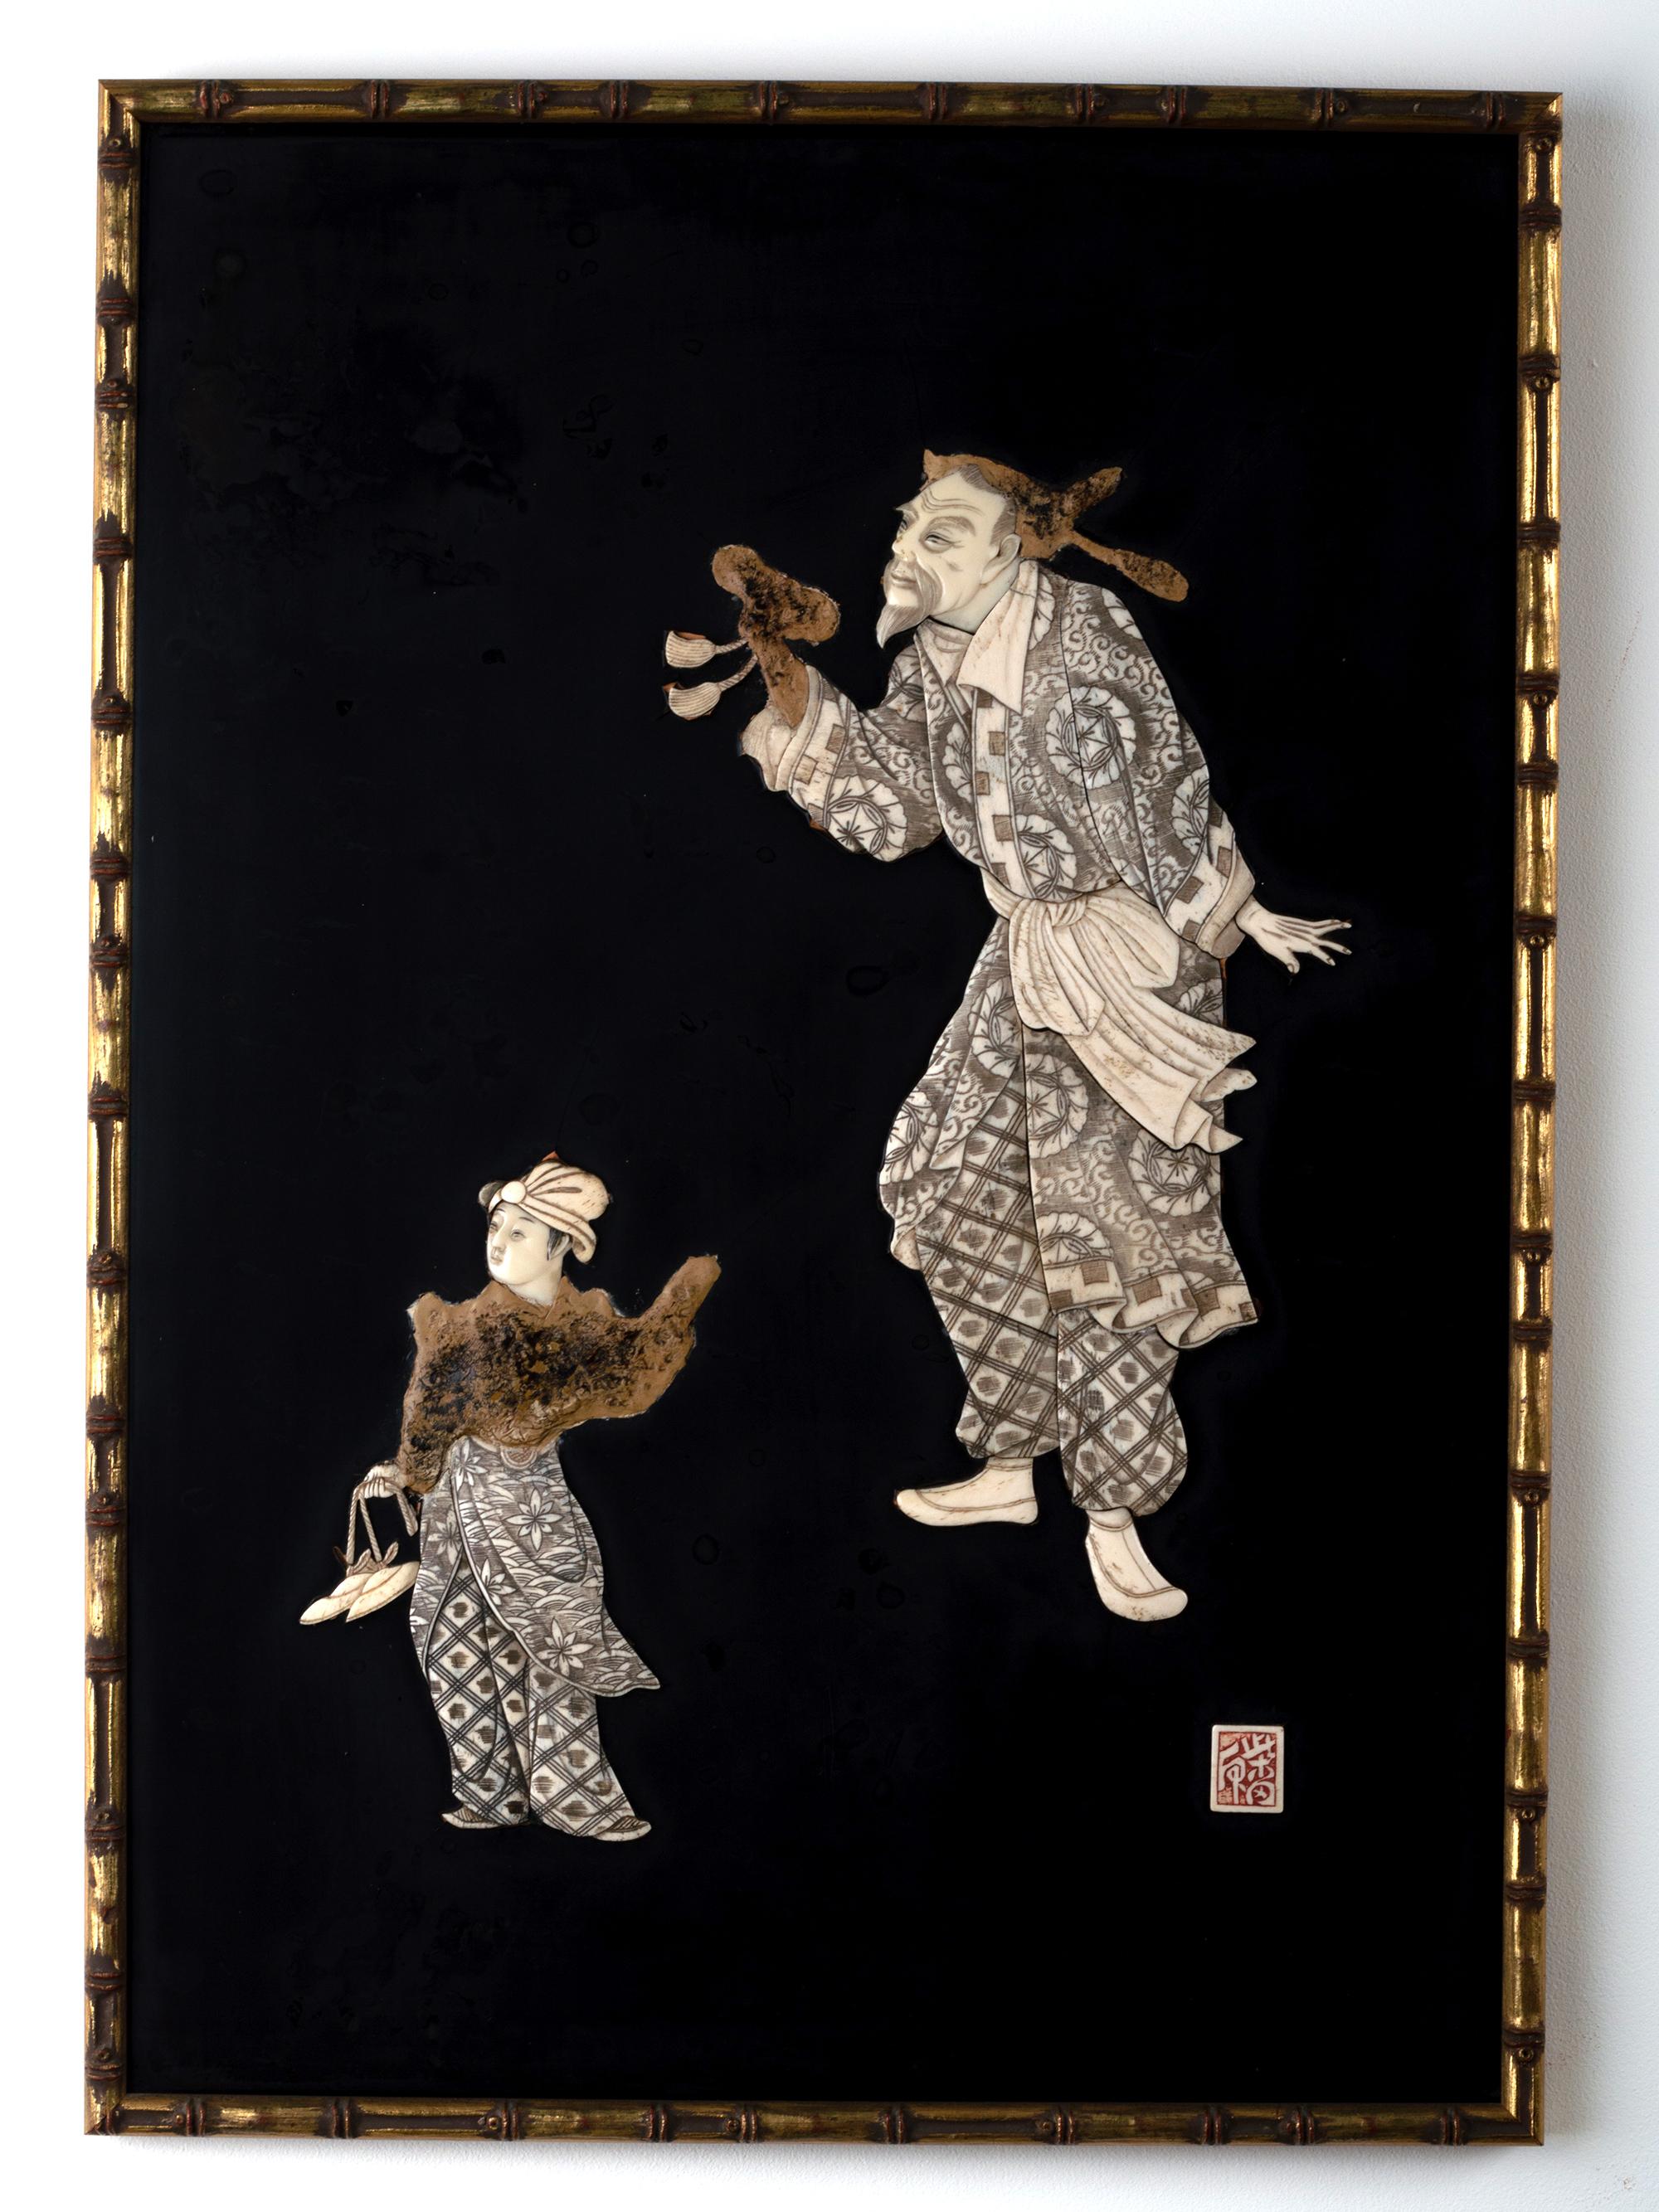 A collection of four Japanese Shibayama lacquer panels of the Meiji period, circa 1900.

The Japanese black lacquered plaques are presented in vintage gilt simulated bamboo frames.
The collection is comprised of four panels in two varying